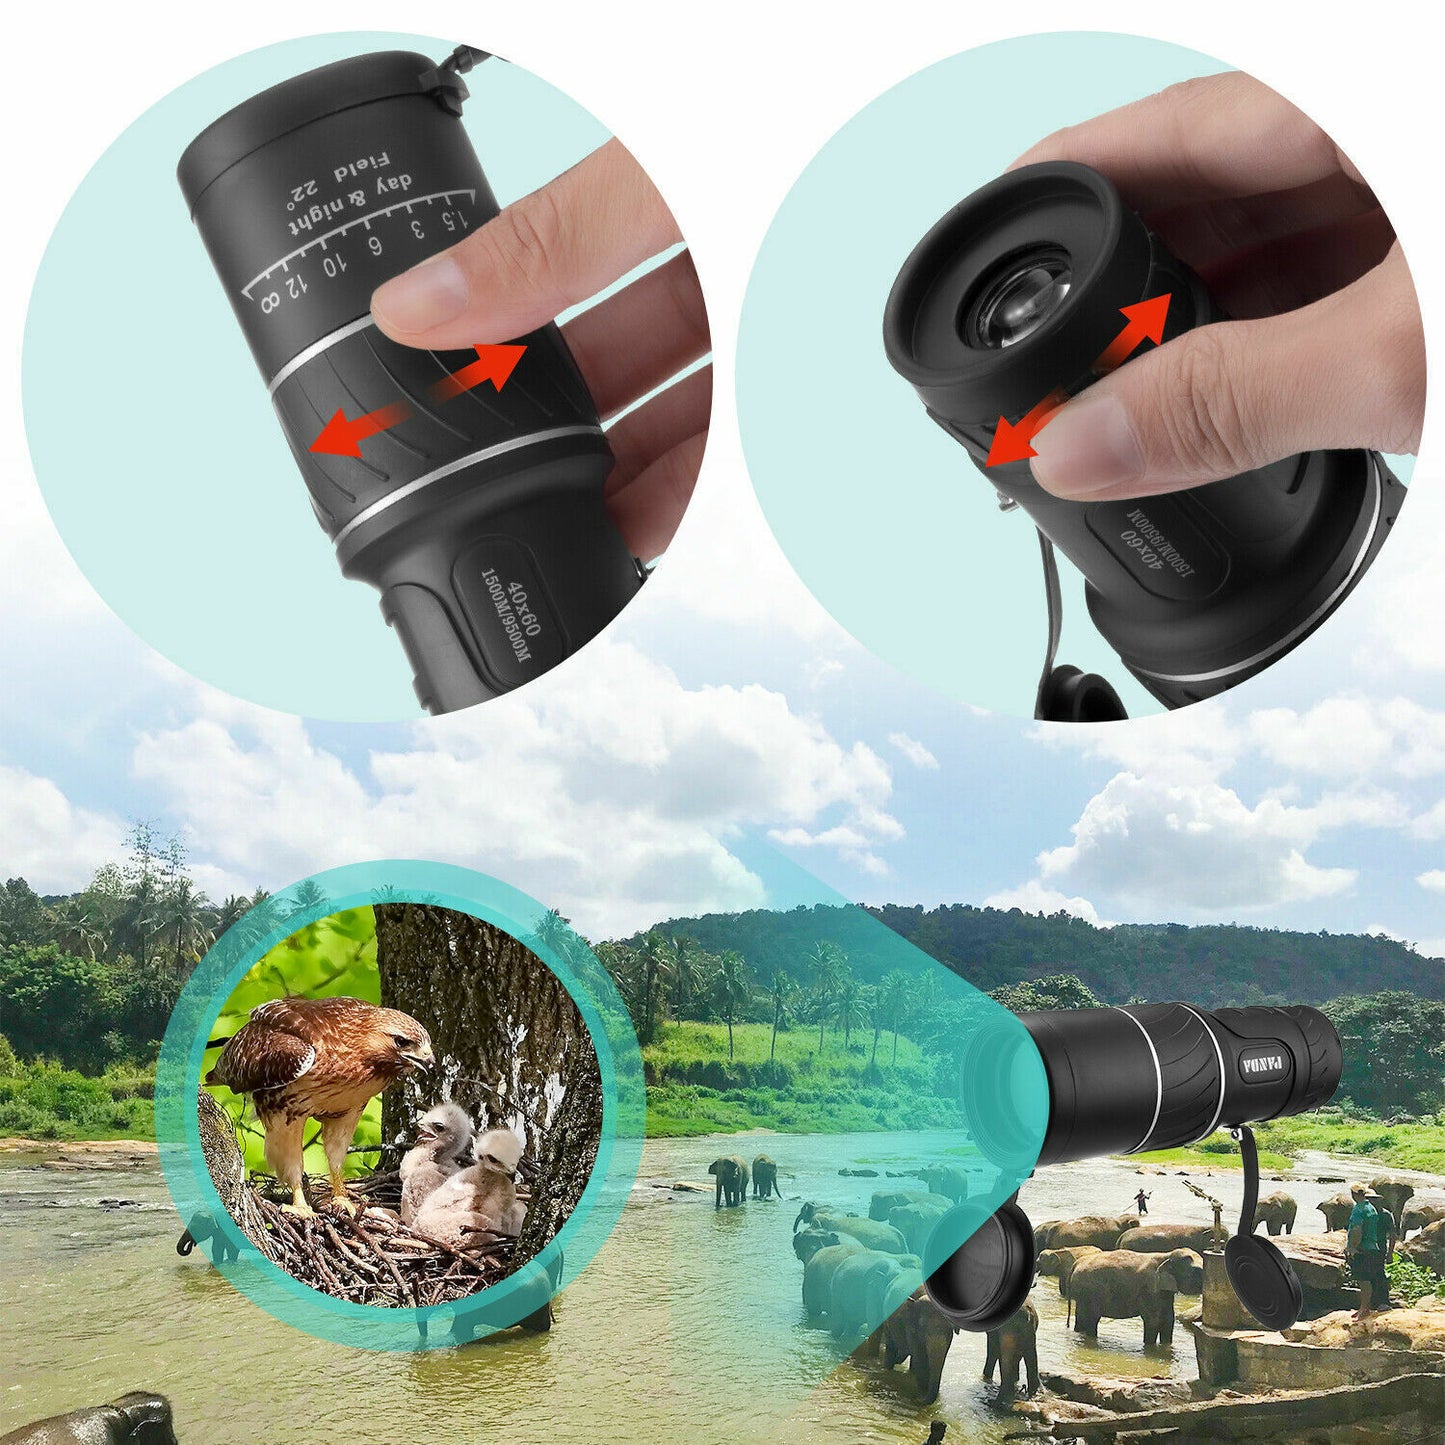 40x60 Day Night Vision HD Optical Monocular Hunting Camping Handheld Telescope Life Waterproof, Anti-Fog Monocular Suitable For Observing Nature Animals